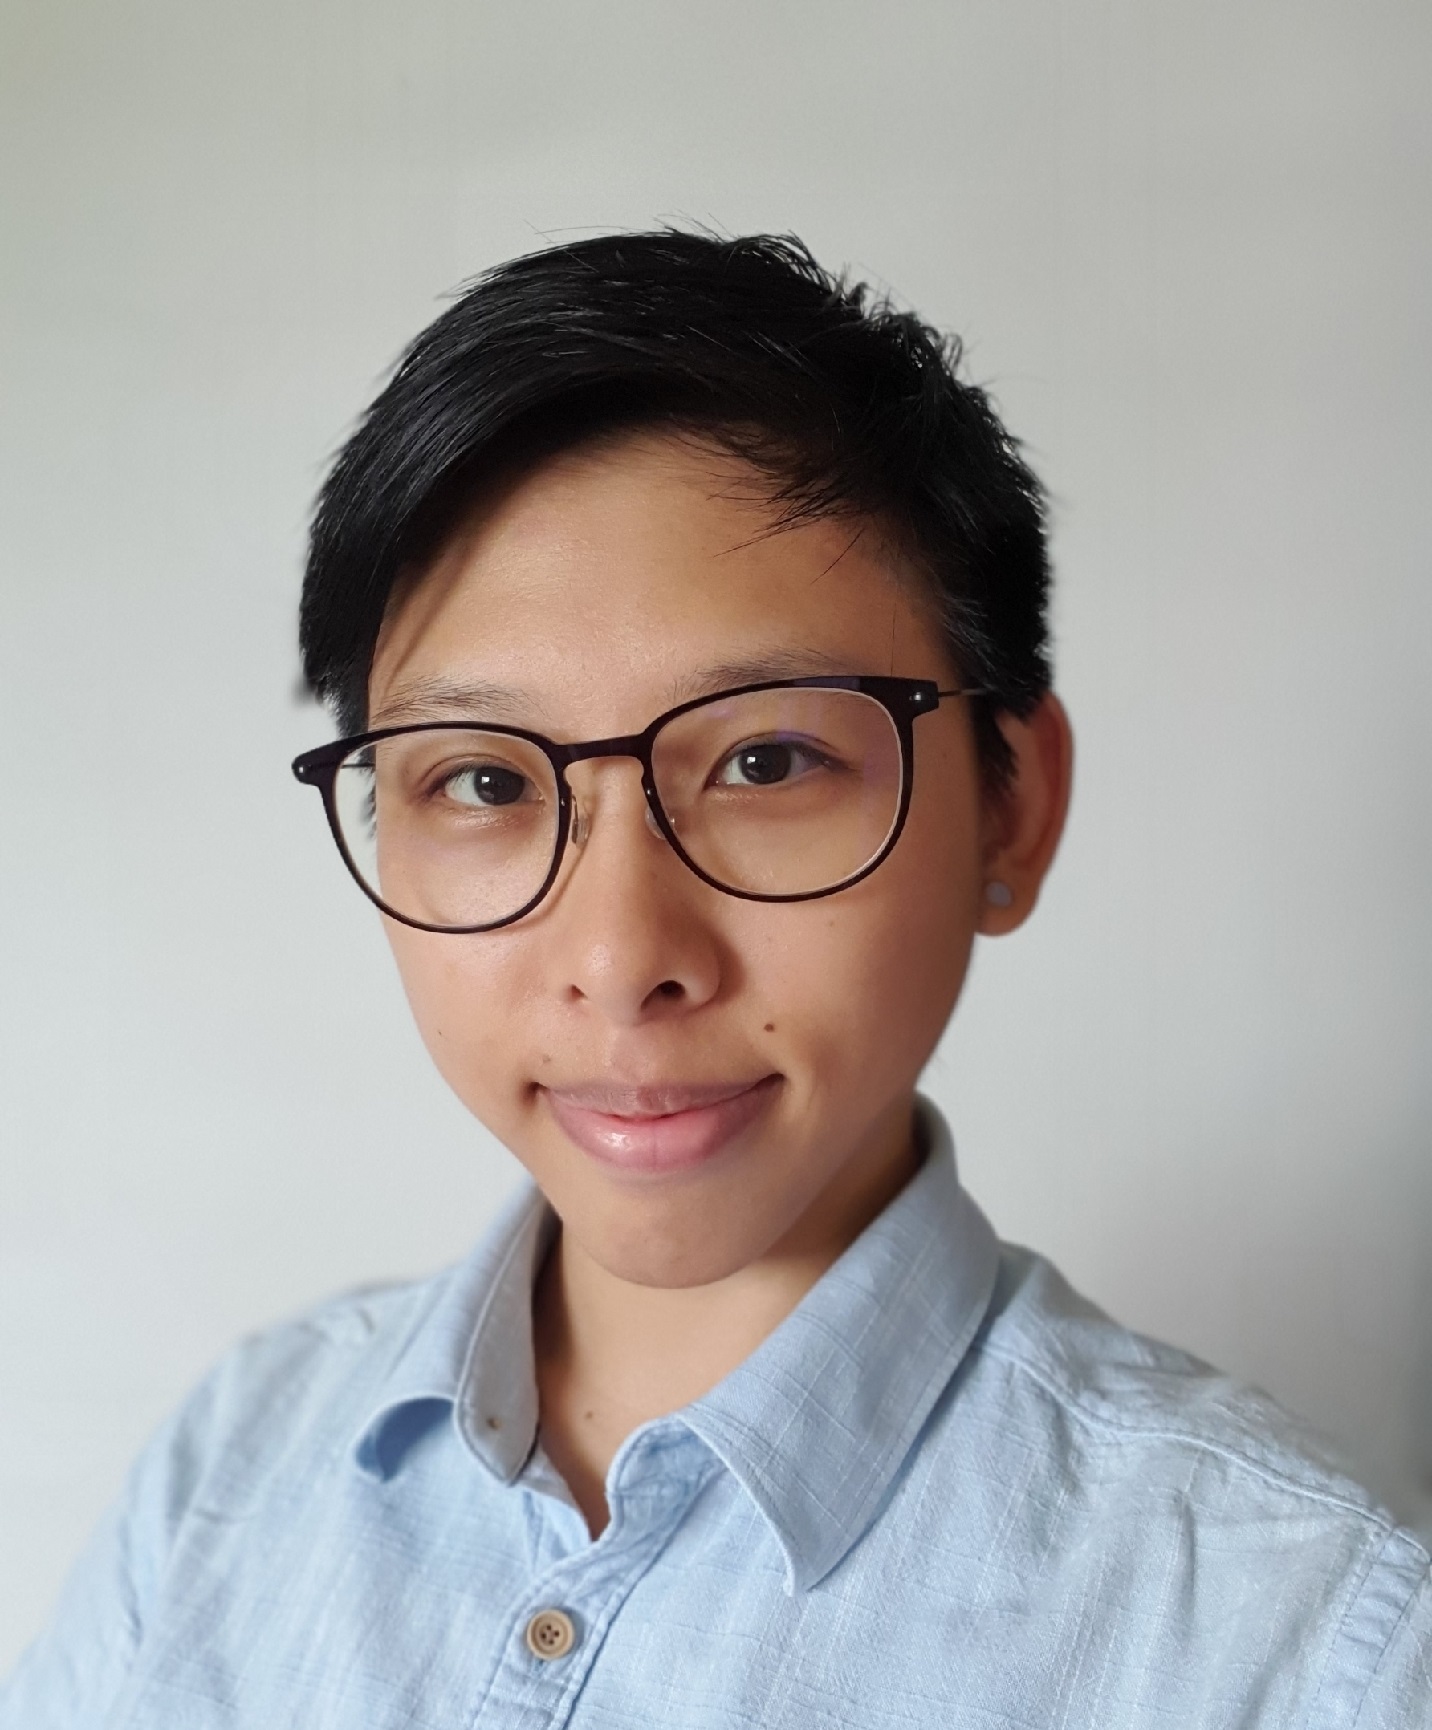 LIU Qi Quintessence, Research Assistant, Information Technology & Operations Management, NBS, Singapore